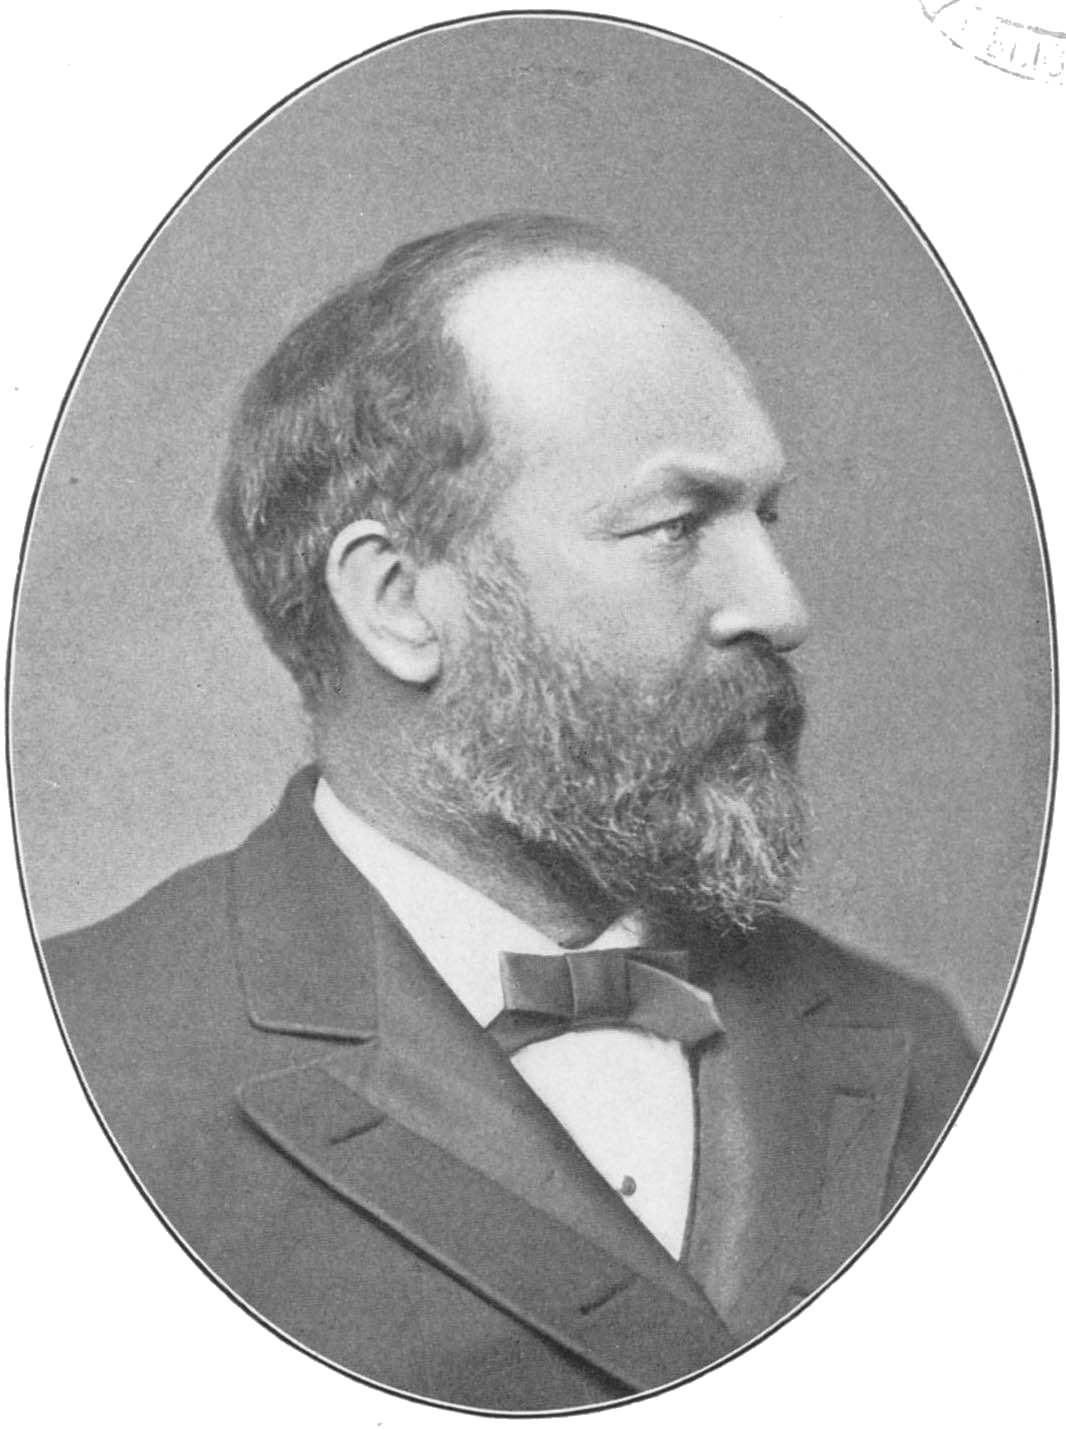 The 20th President of the United States was James Garfield.